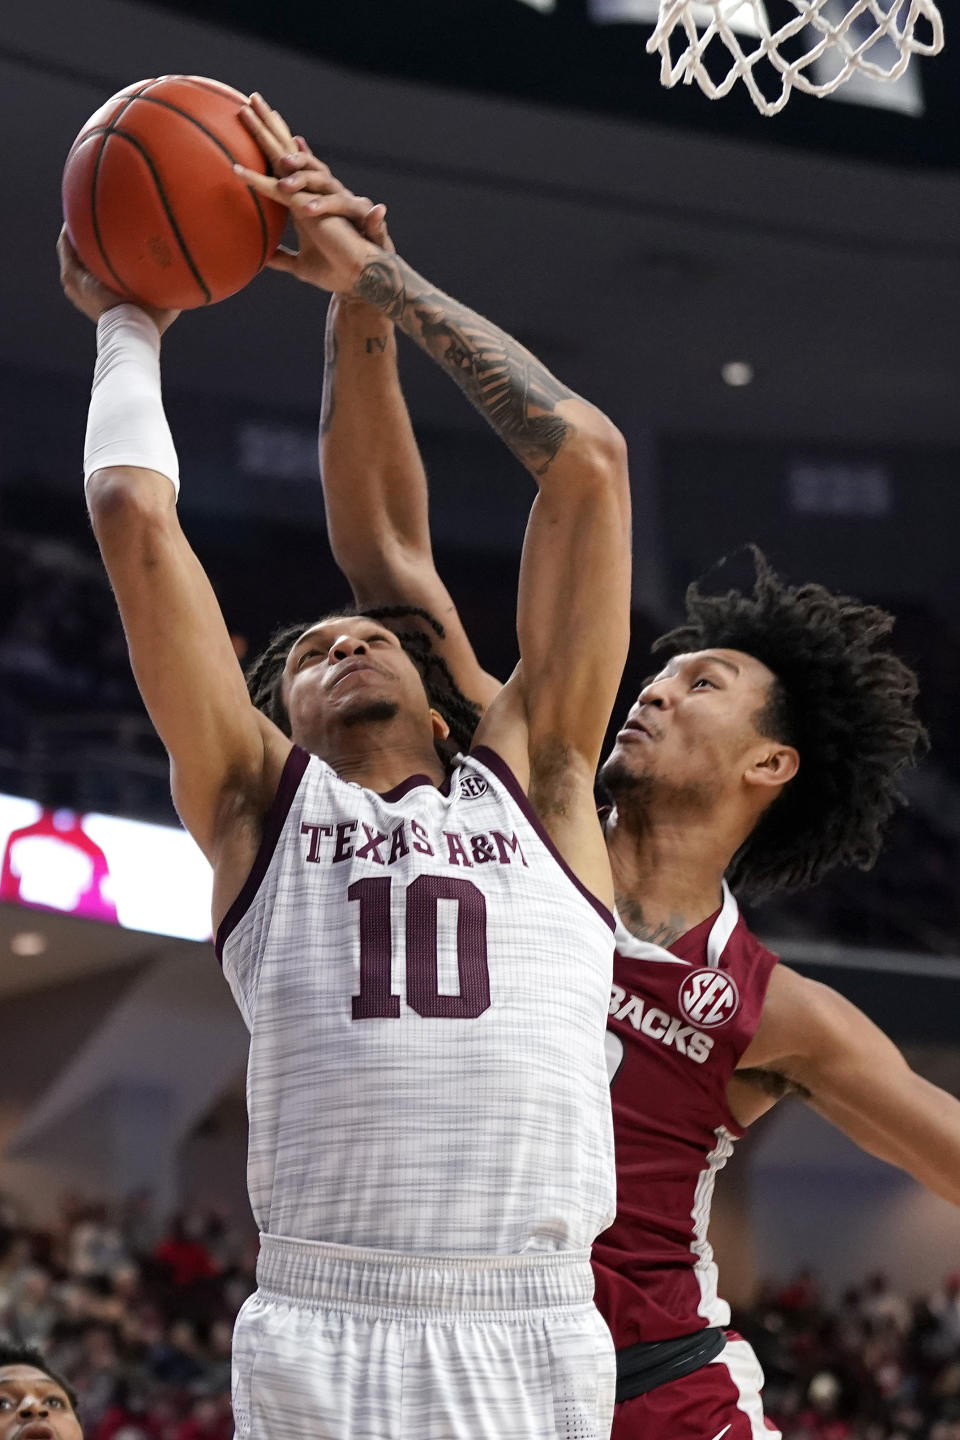 Texas A&M forward Ethan Henderson (10) shoots a basket as Arkansas forward Jaylin Williams (10) defends during the second half of an NCAA college basketball game Saturday, Jan. 8, 2022, in College Station, Texas. (AP Photo/Sam Craft)